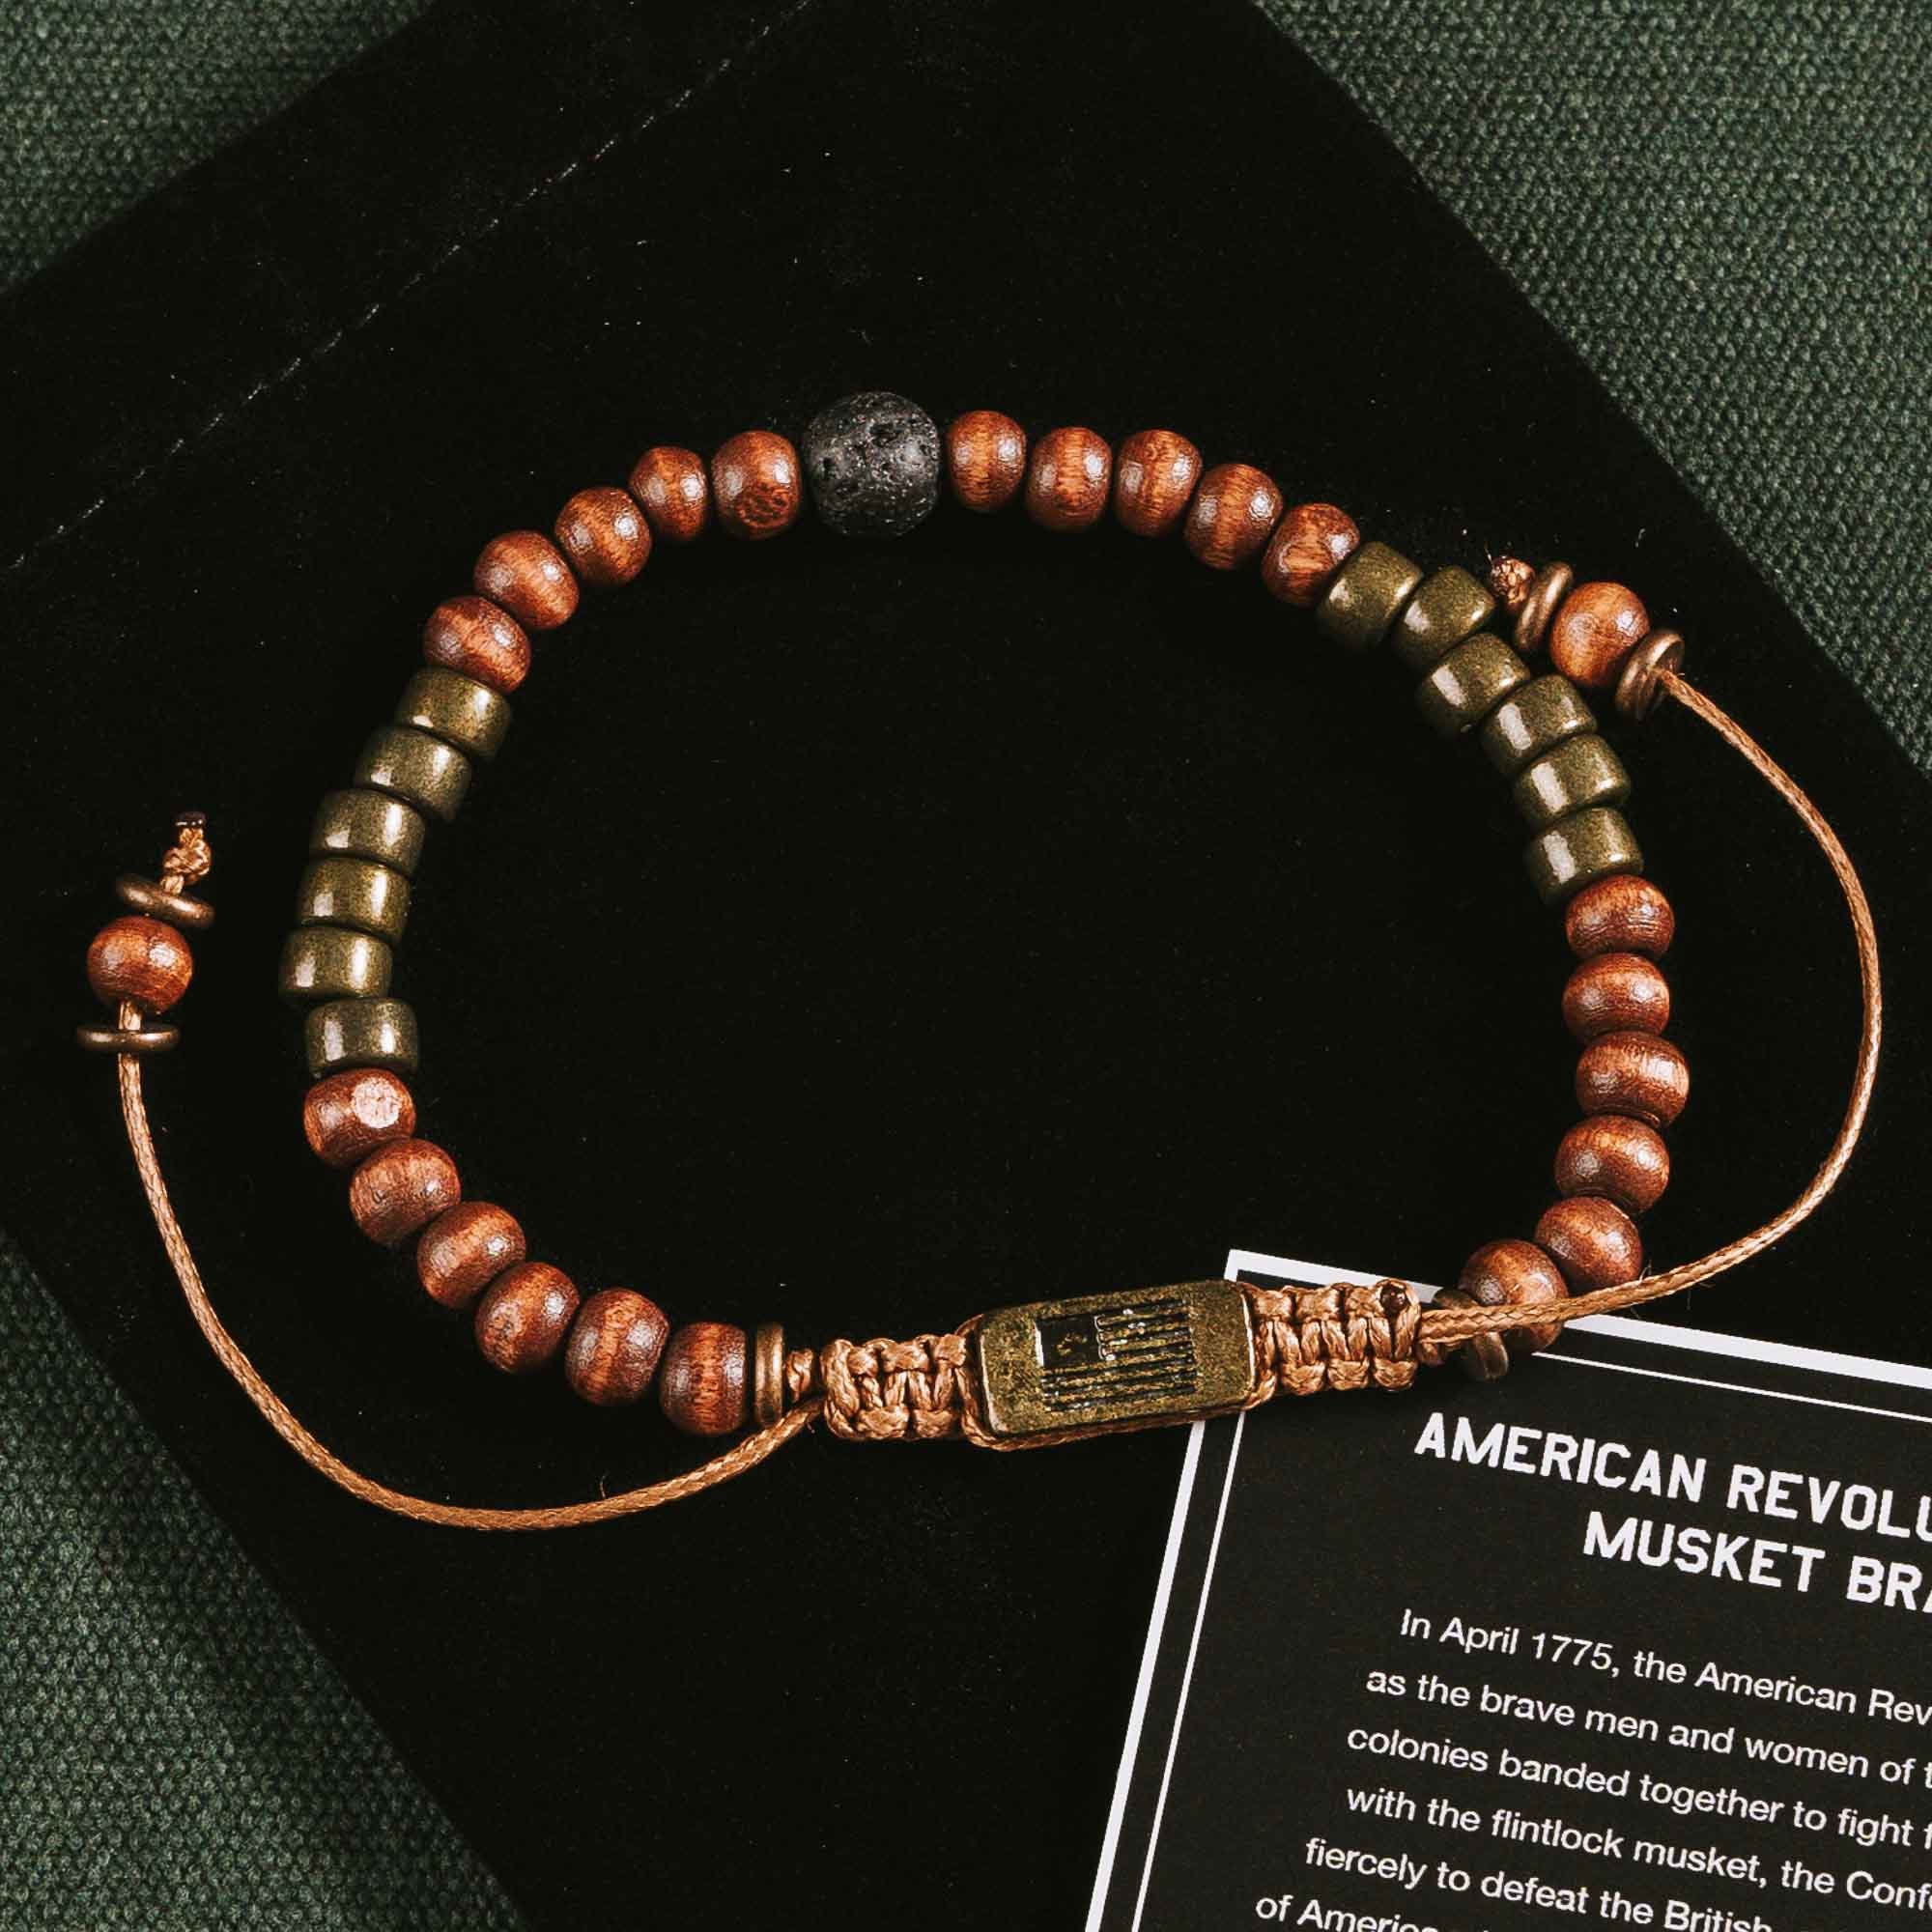 American Revolutionary War Musket Bracelet: HELPS PAIR VETERANS WITH A SERVICE DOG OR SHELTER DOG